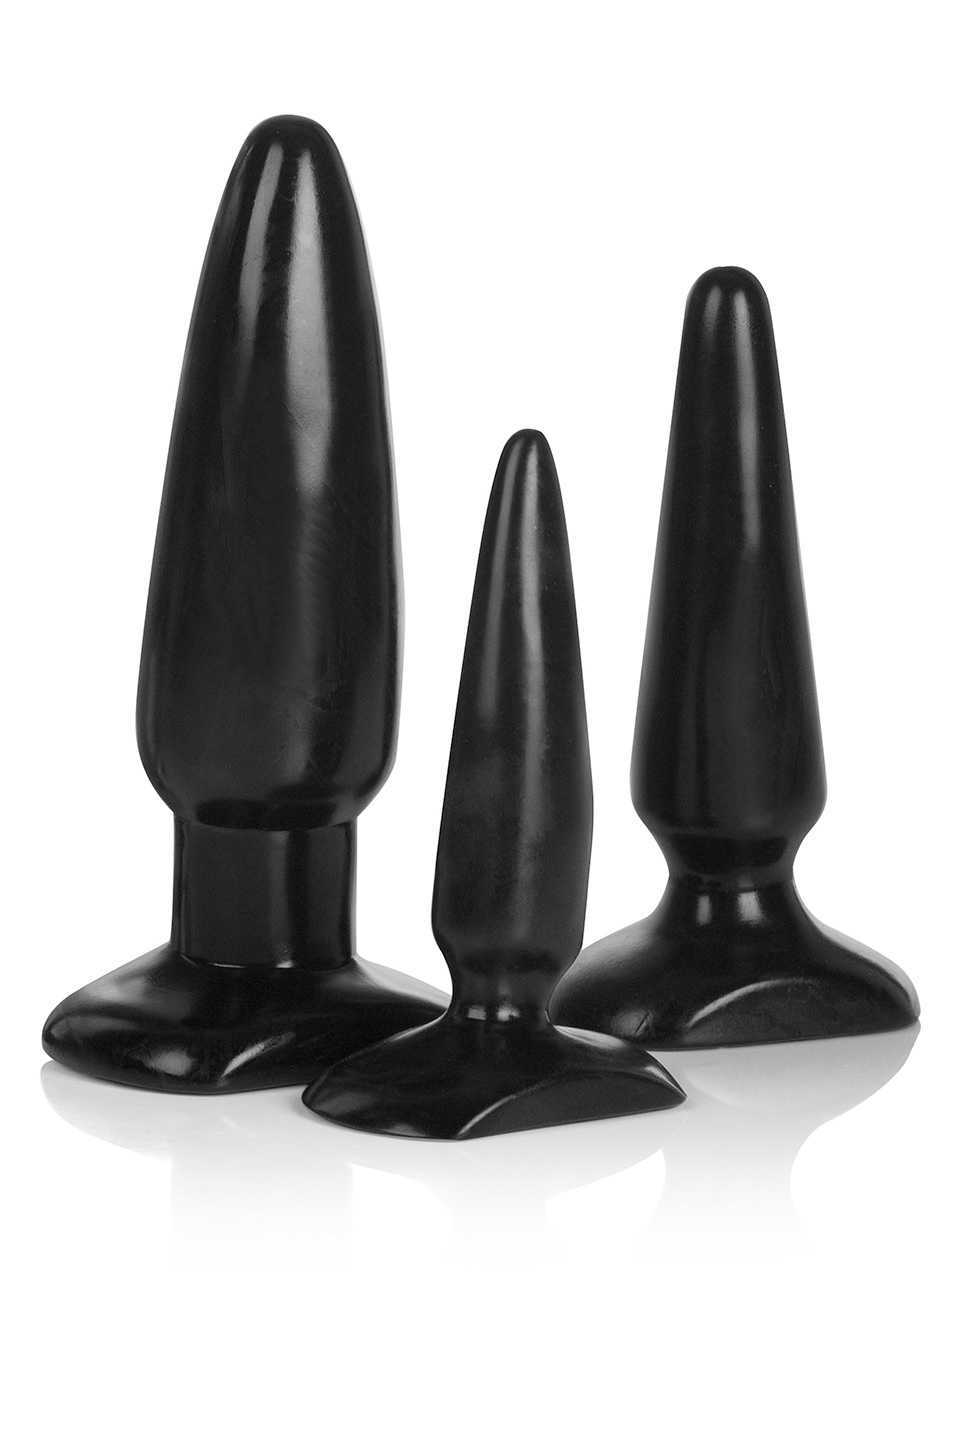 ANAL BY CALEXOTICS 3 Buttplugs Anal Trainer Kit